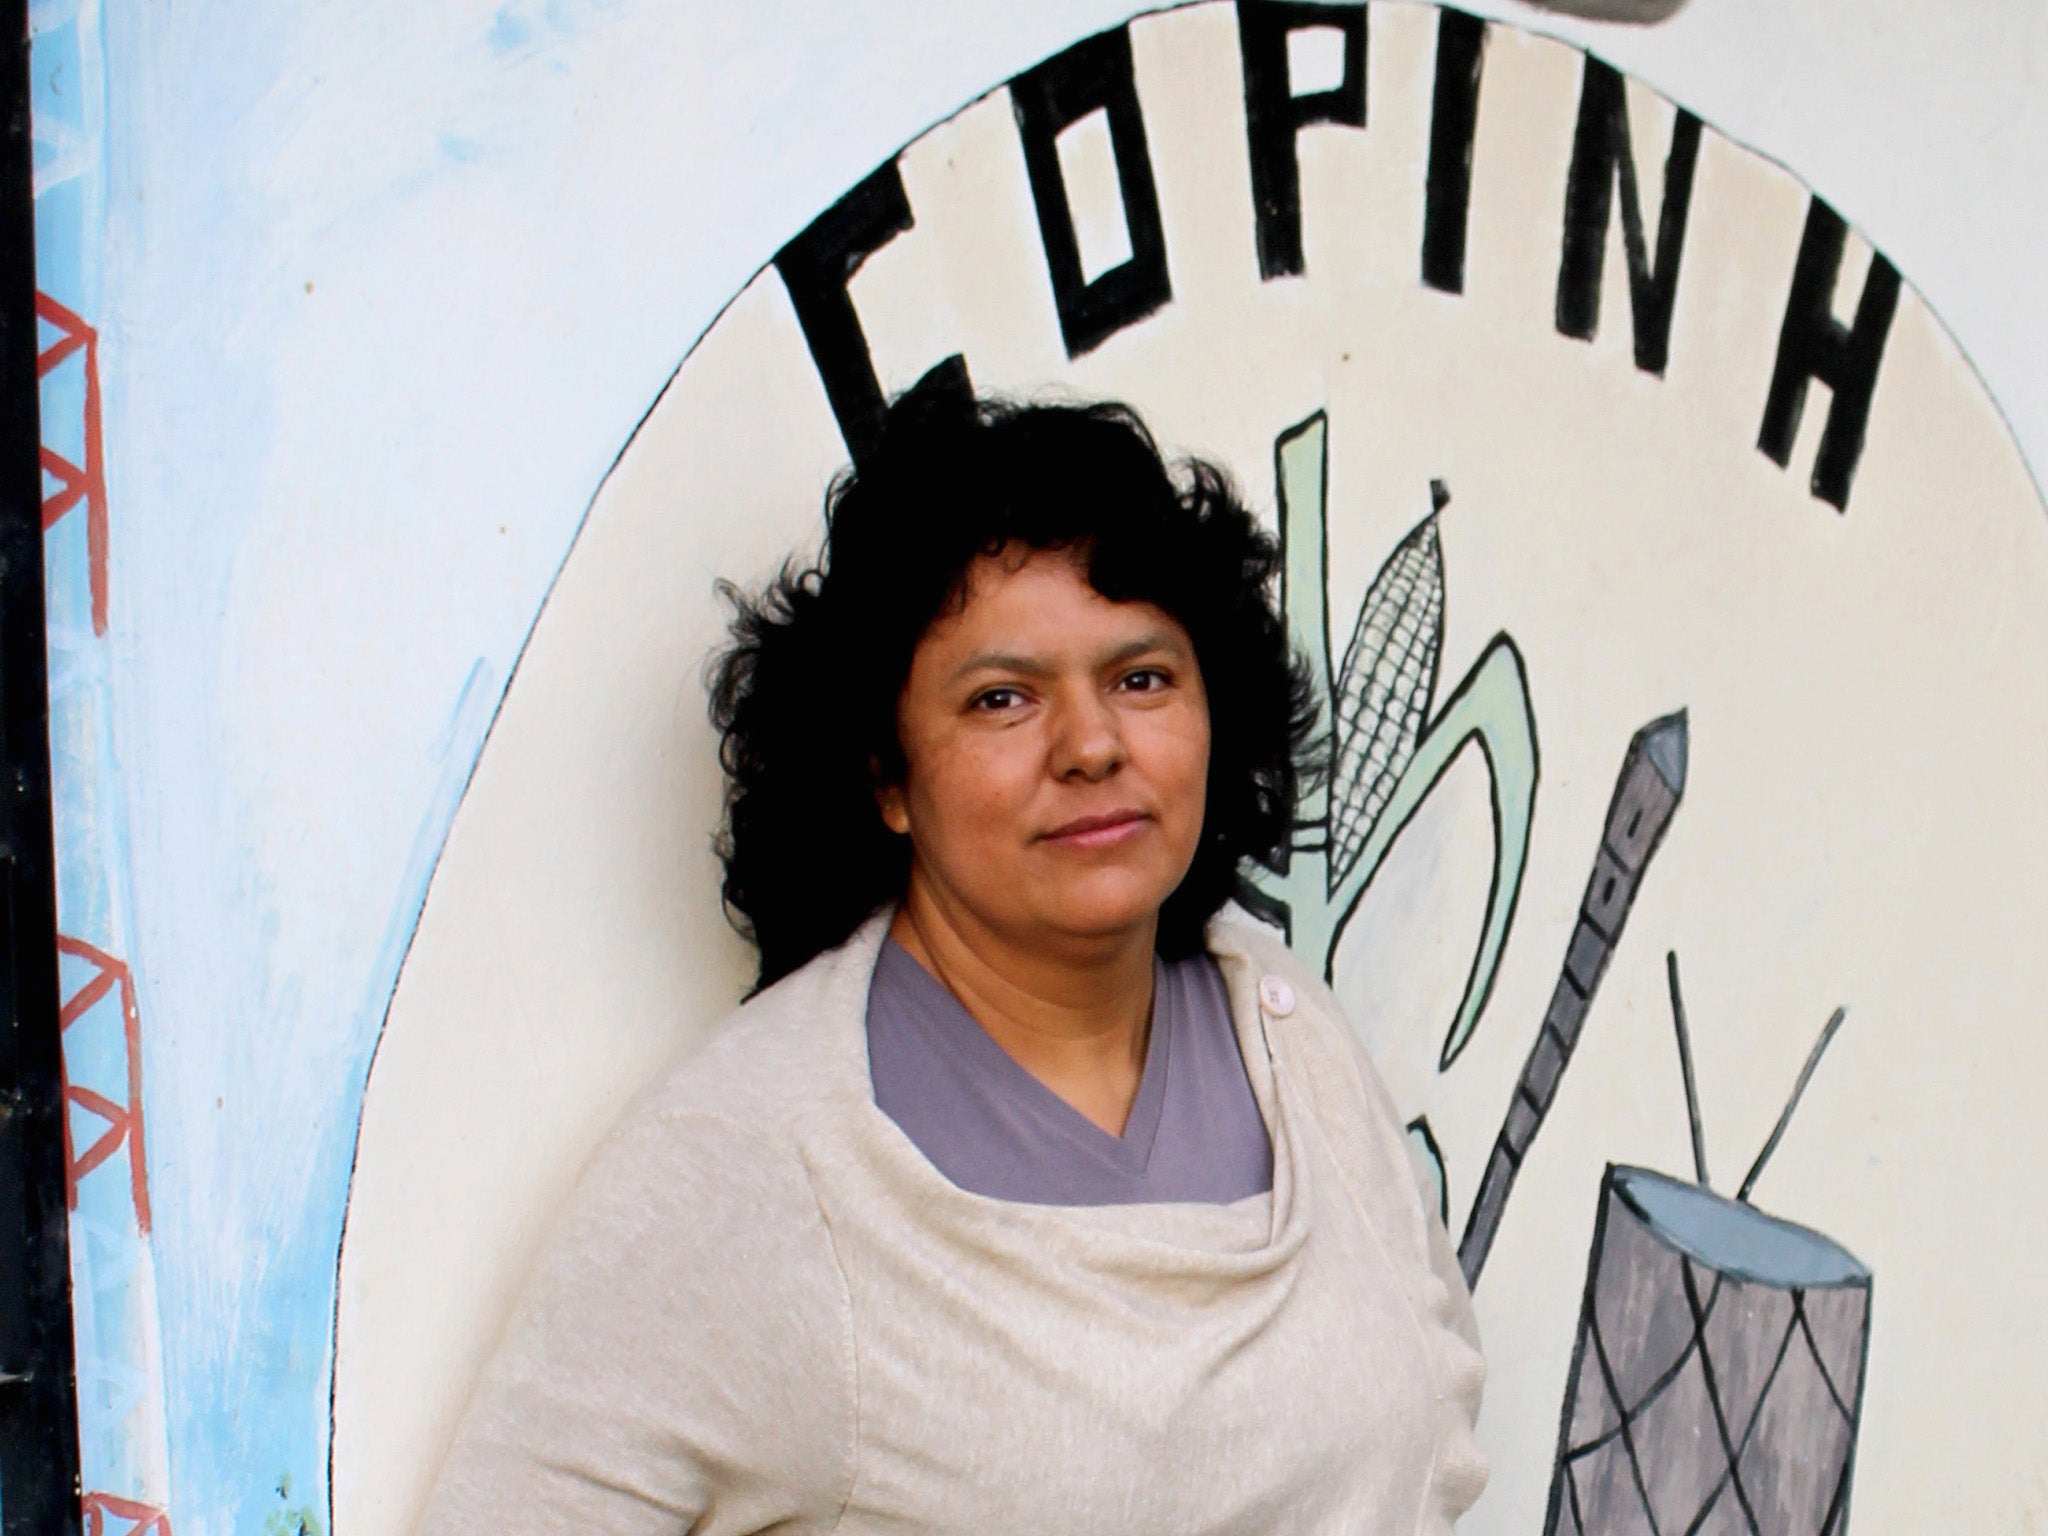 Berta Caceres was recently awarded the Goldman Environmental Prize